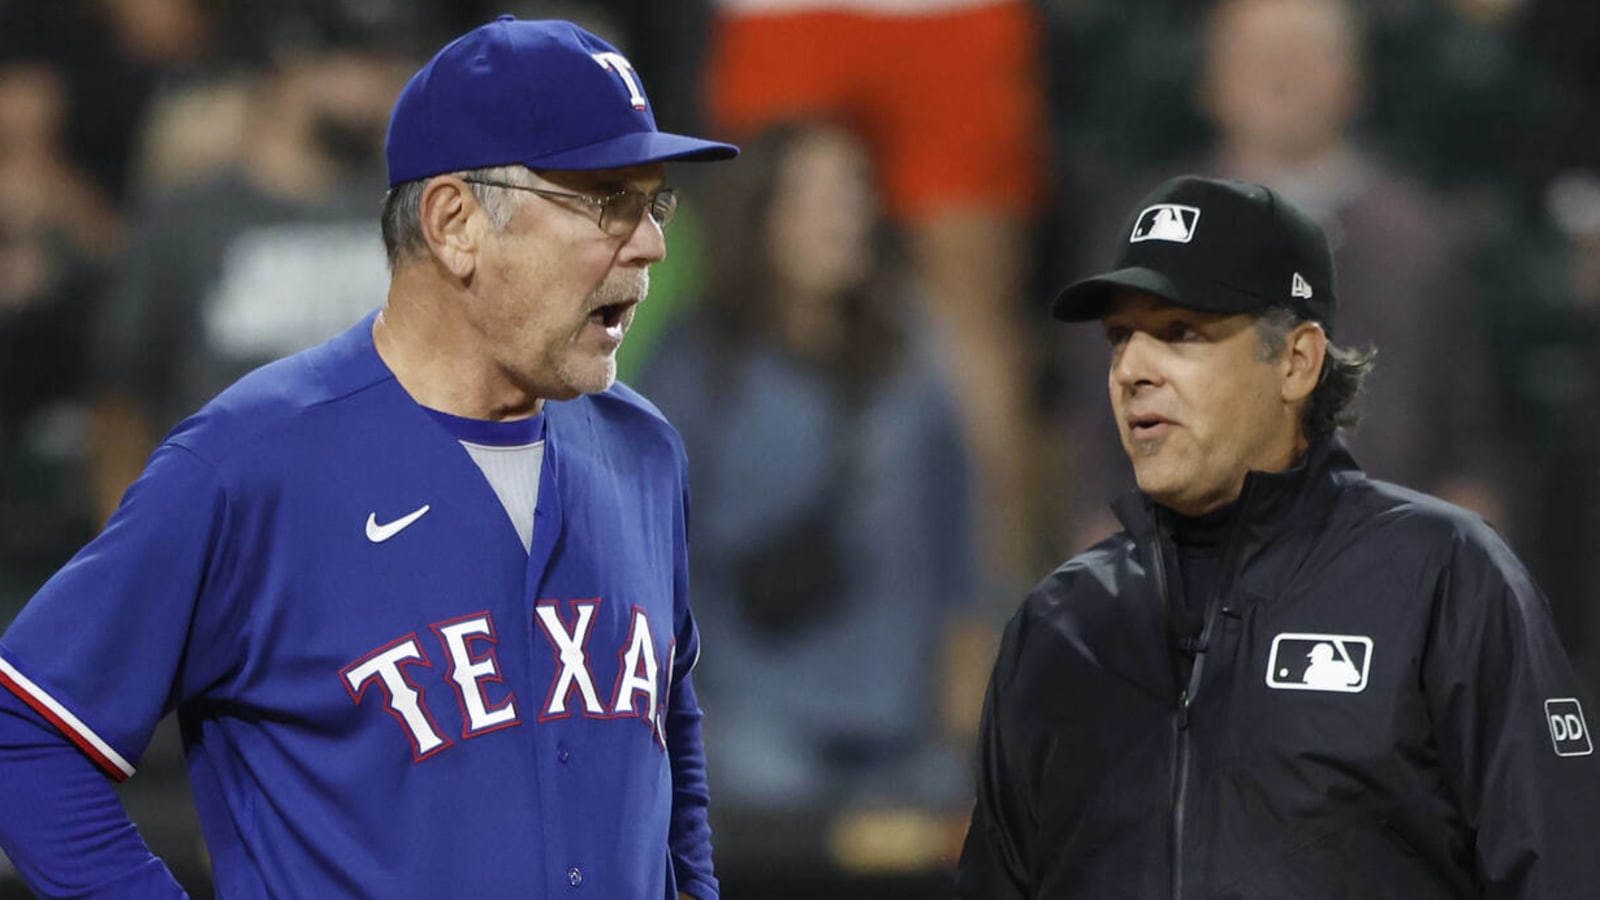 Rangers manager Bruce Bochy ejected after reversed call